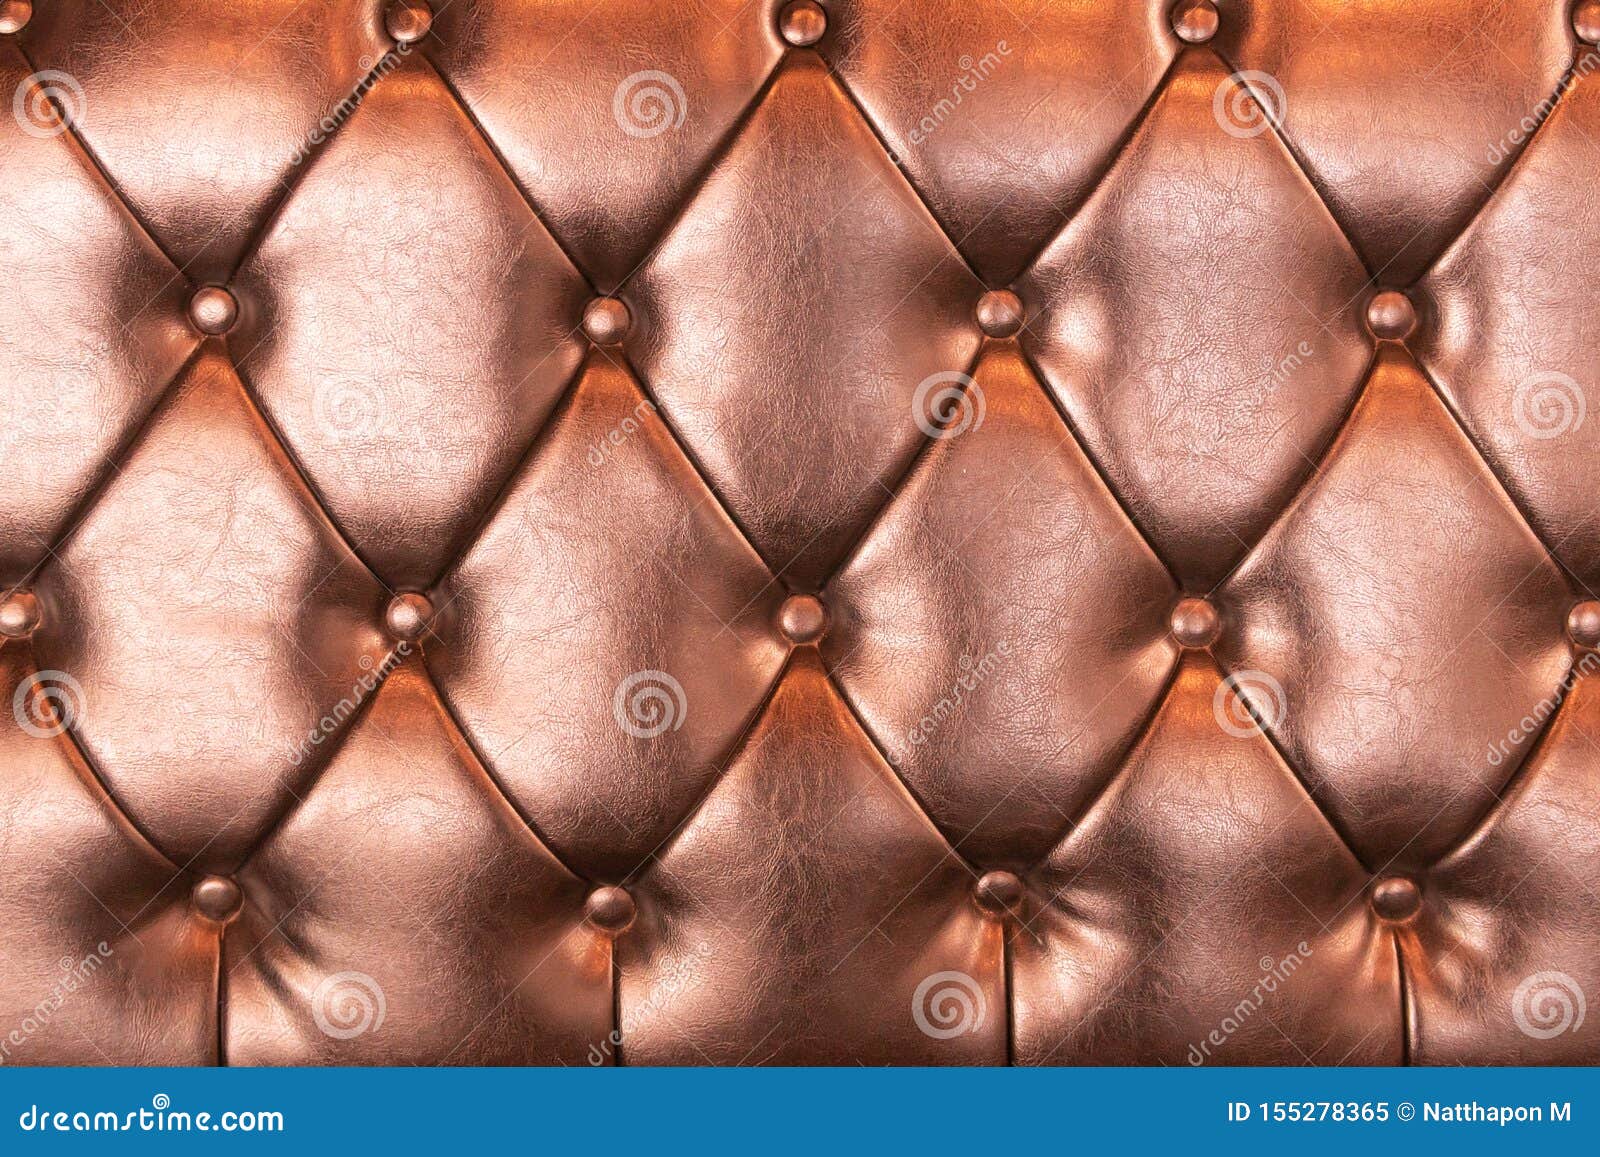 leather sofa texture seamless background, rose gold leathers upholstery pattern